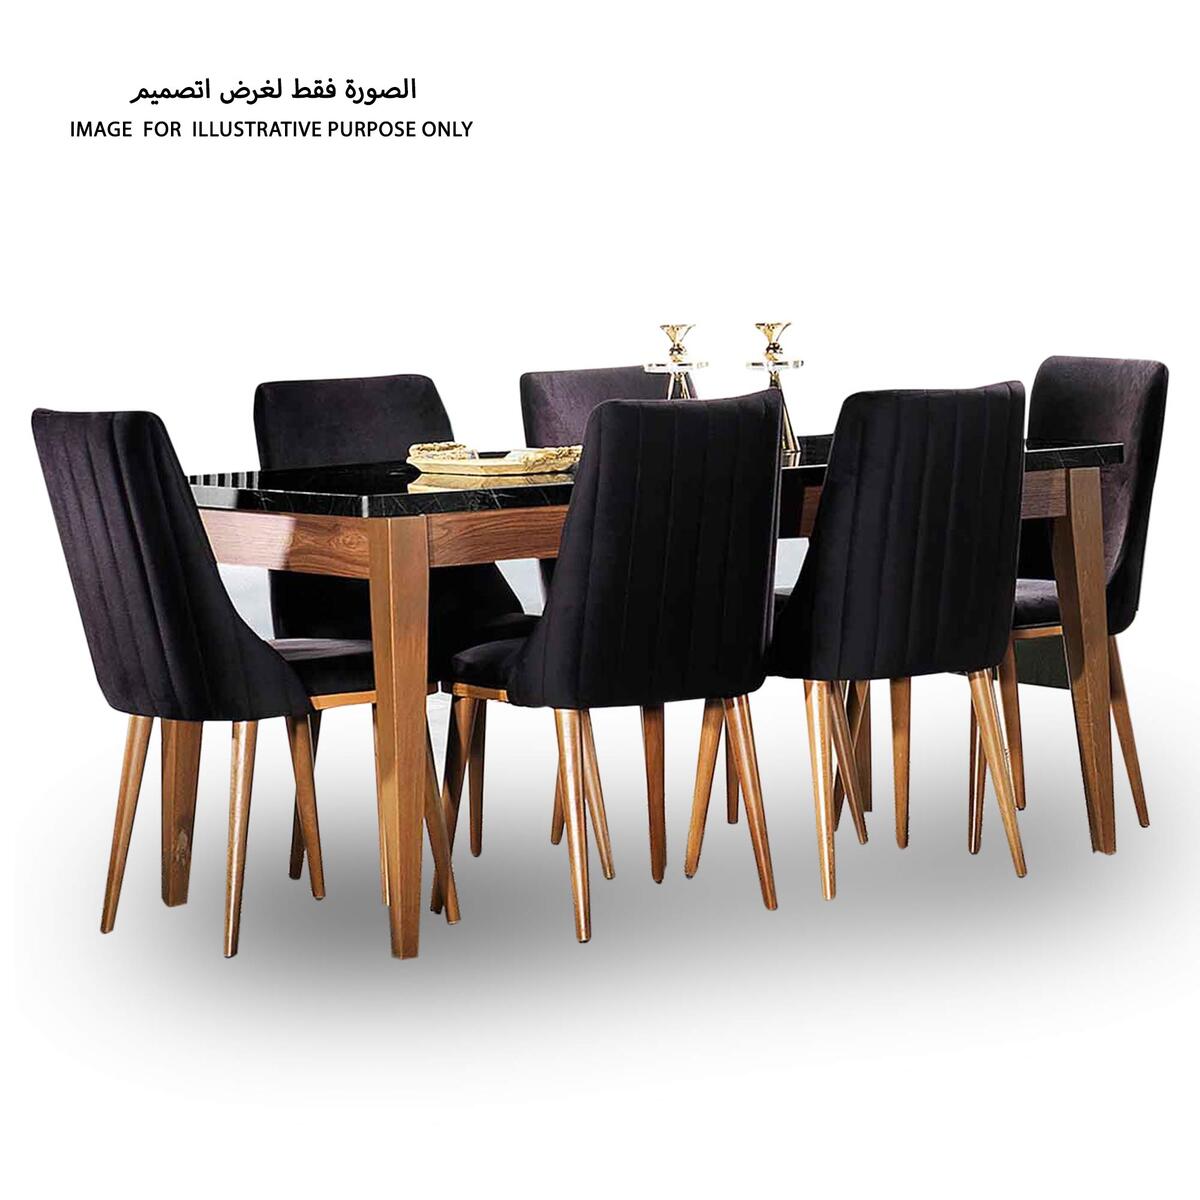 Maple Leaf Extendable Dining Table 6, What Size Is A Table With 6 Chairs